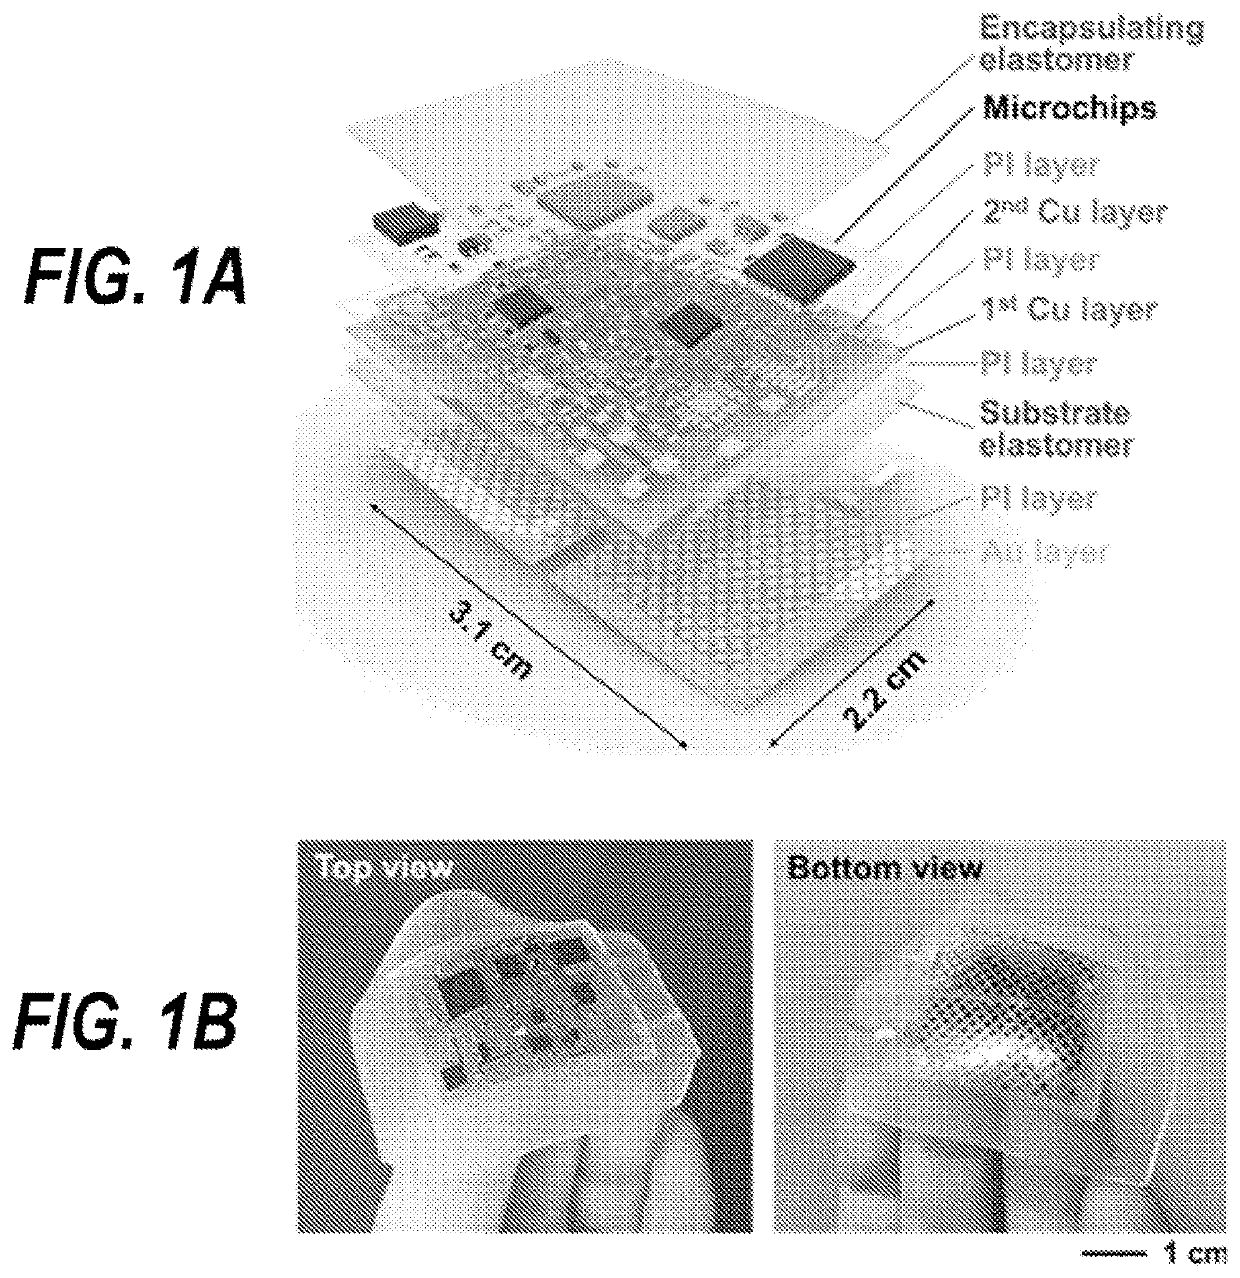 Fully Stretchable, Wireless, Skin-Conformal Bioelectronics for Continuous Stress Monitoring in Daily Life